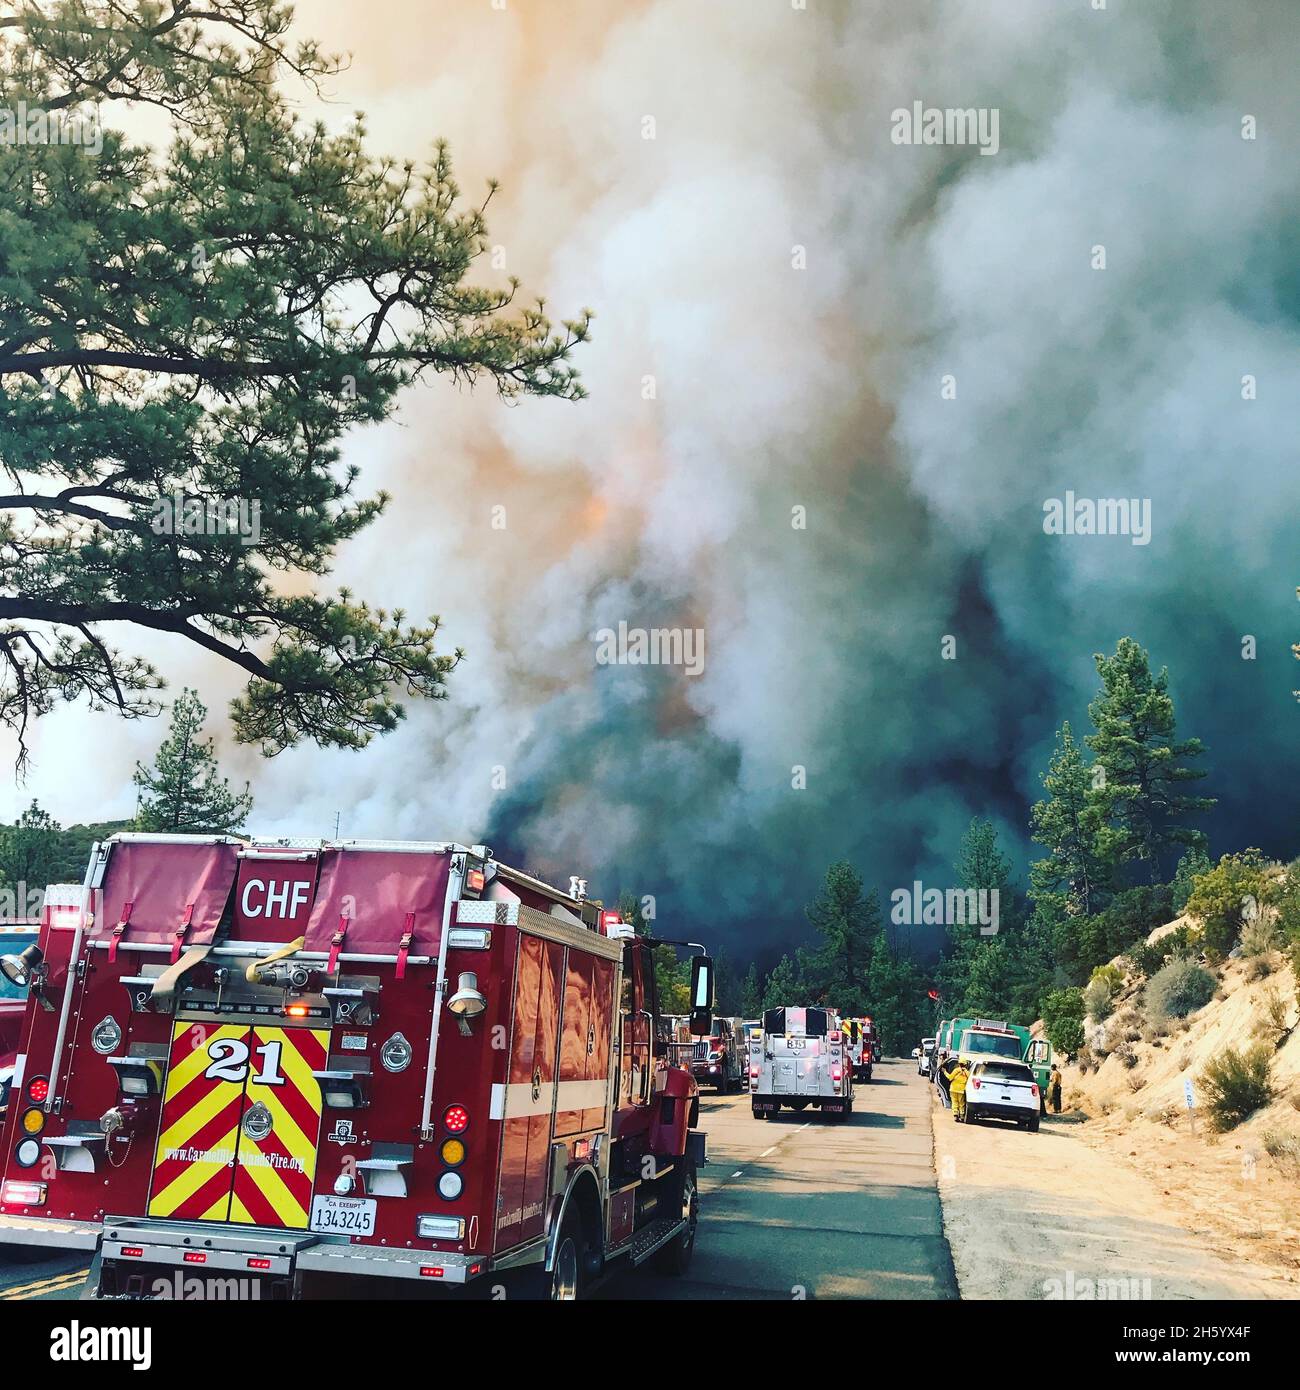 Firefighters responding to a wildfire in California Stock Photo